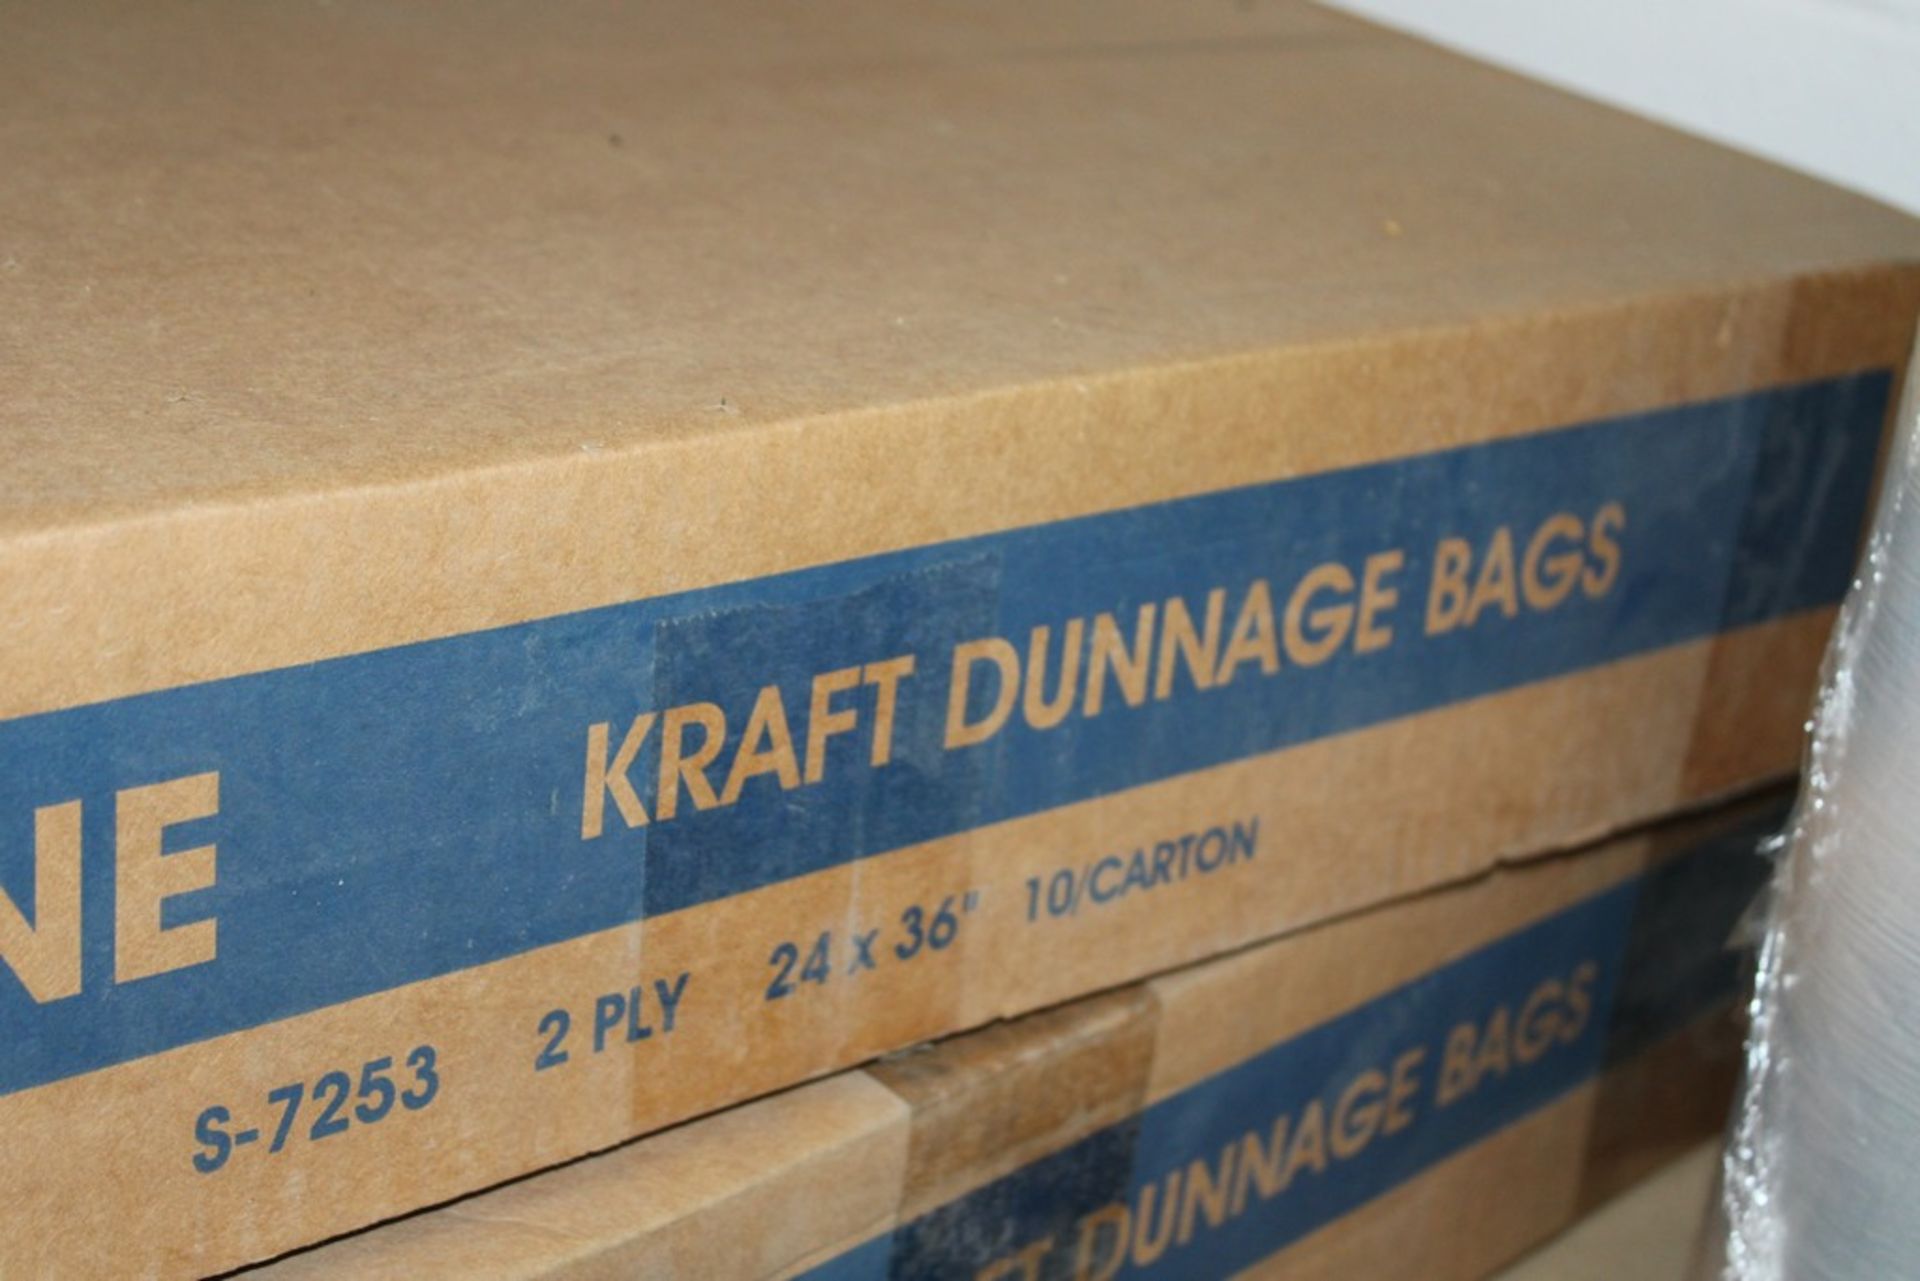 (1) CASE ULINE S-7253 KRAFT DUNNAGE BAGS, 24" X 36", 2-PLY, (10) PER CASE - Image 2 of 2